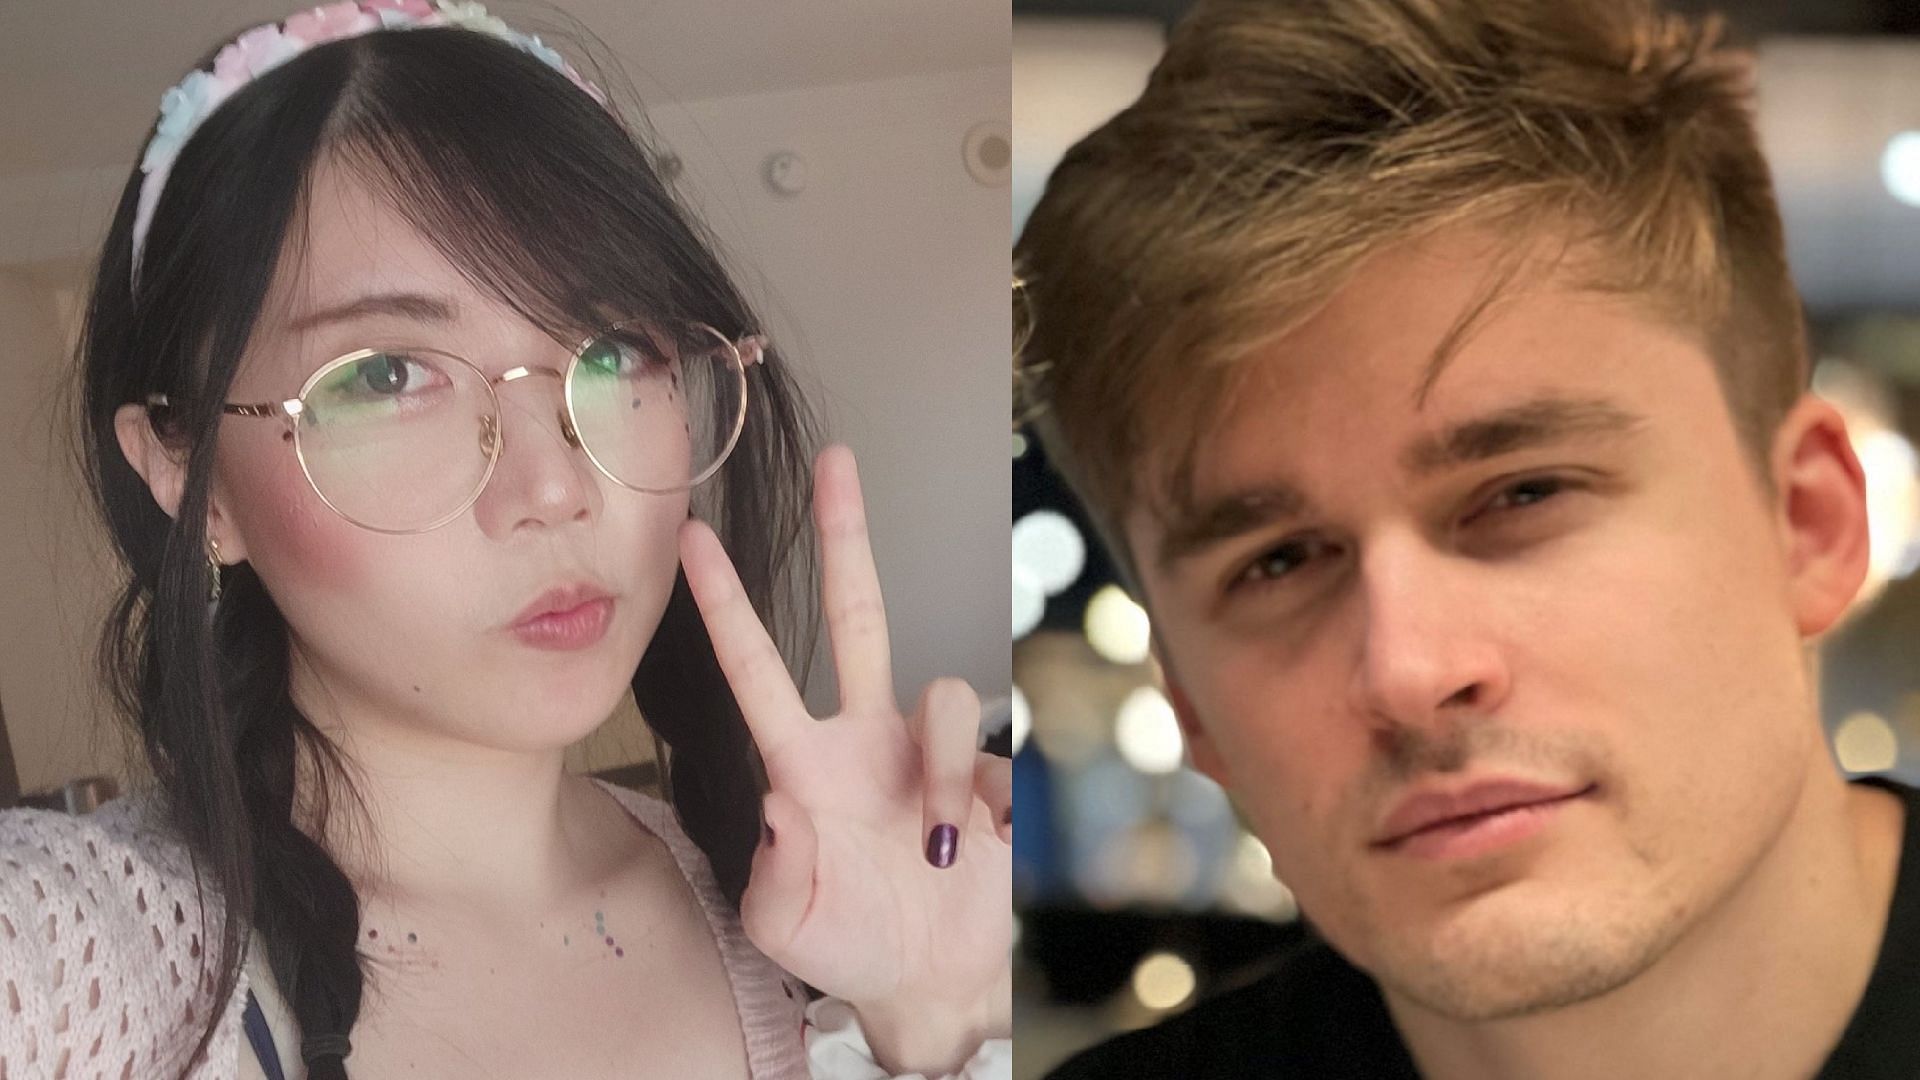 Ludwig declares LilyPichu is the GOAT of OfflineTV(Images via LilyPichu/Twitter, LudwigAhgren/Twitter)